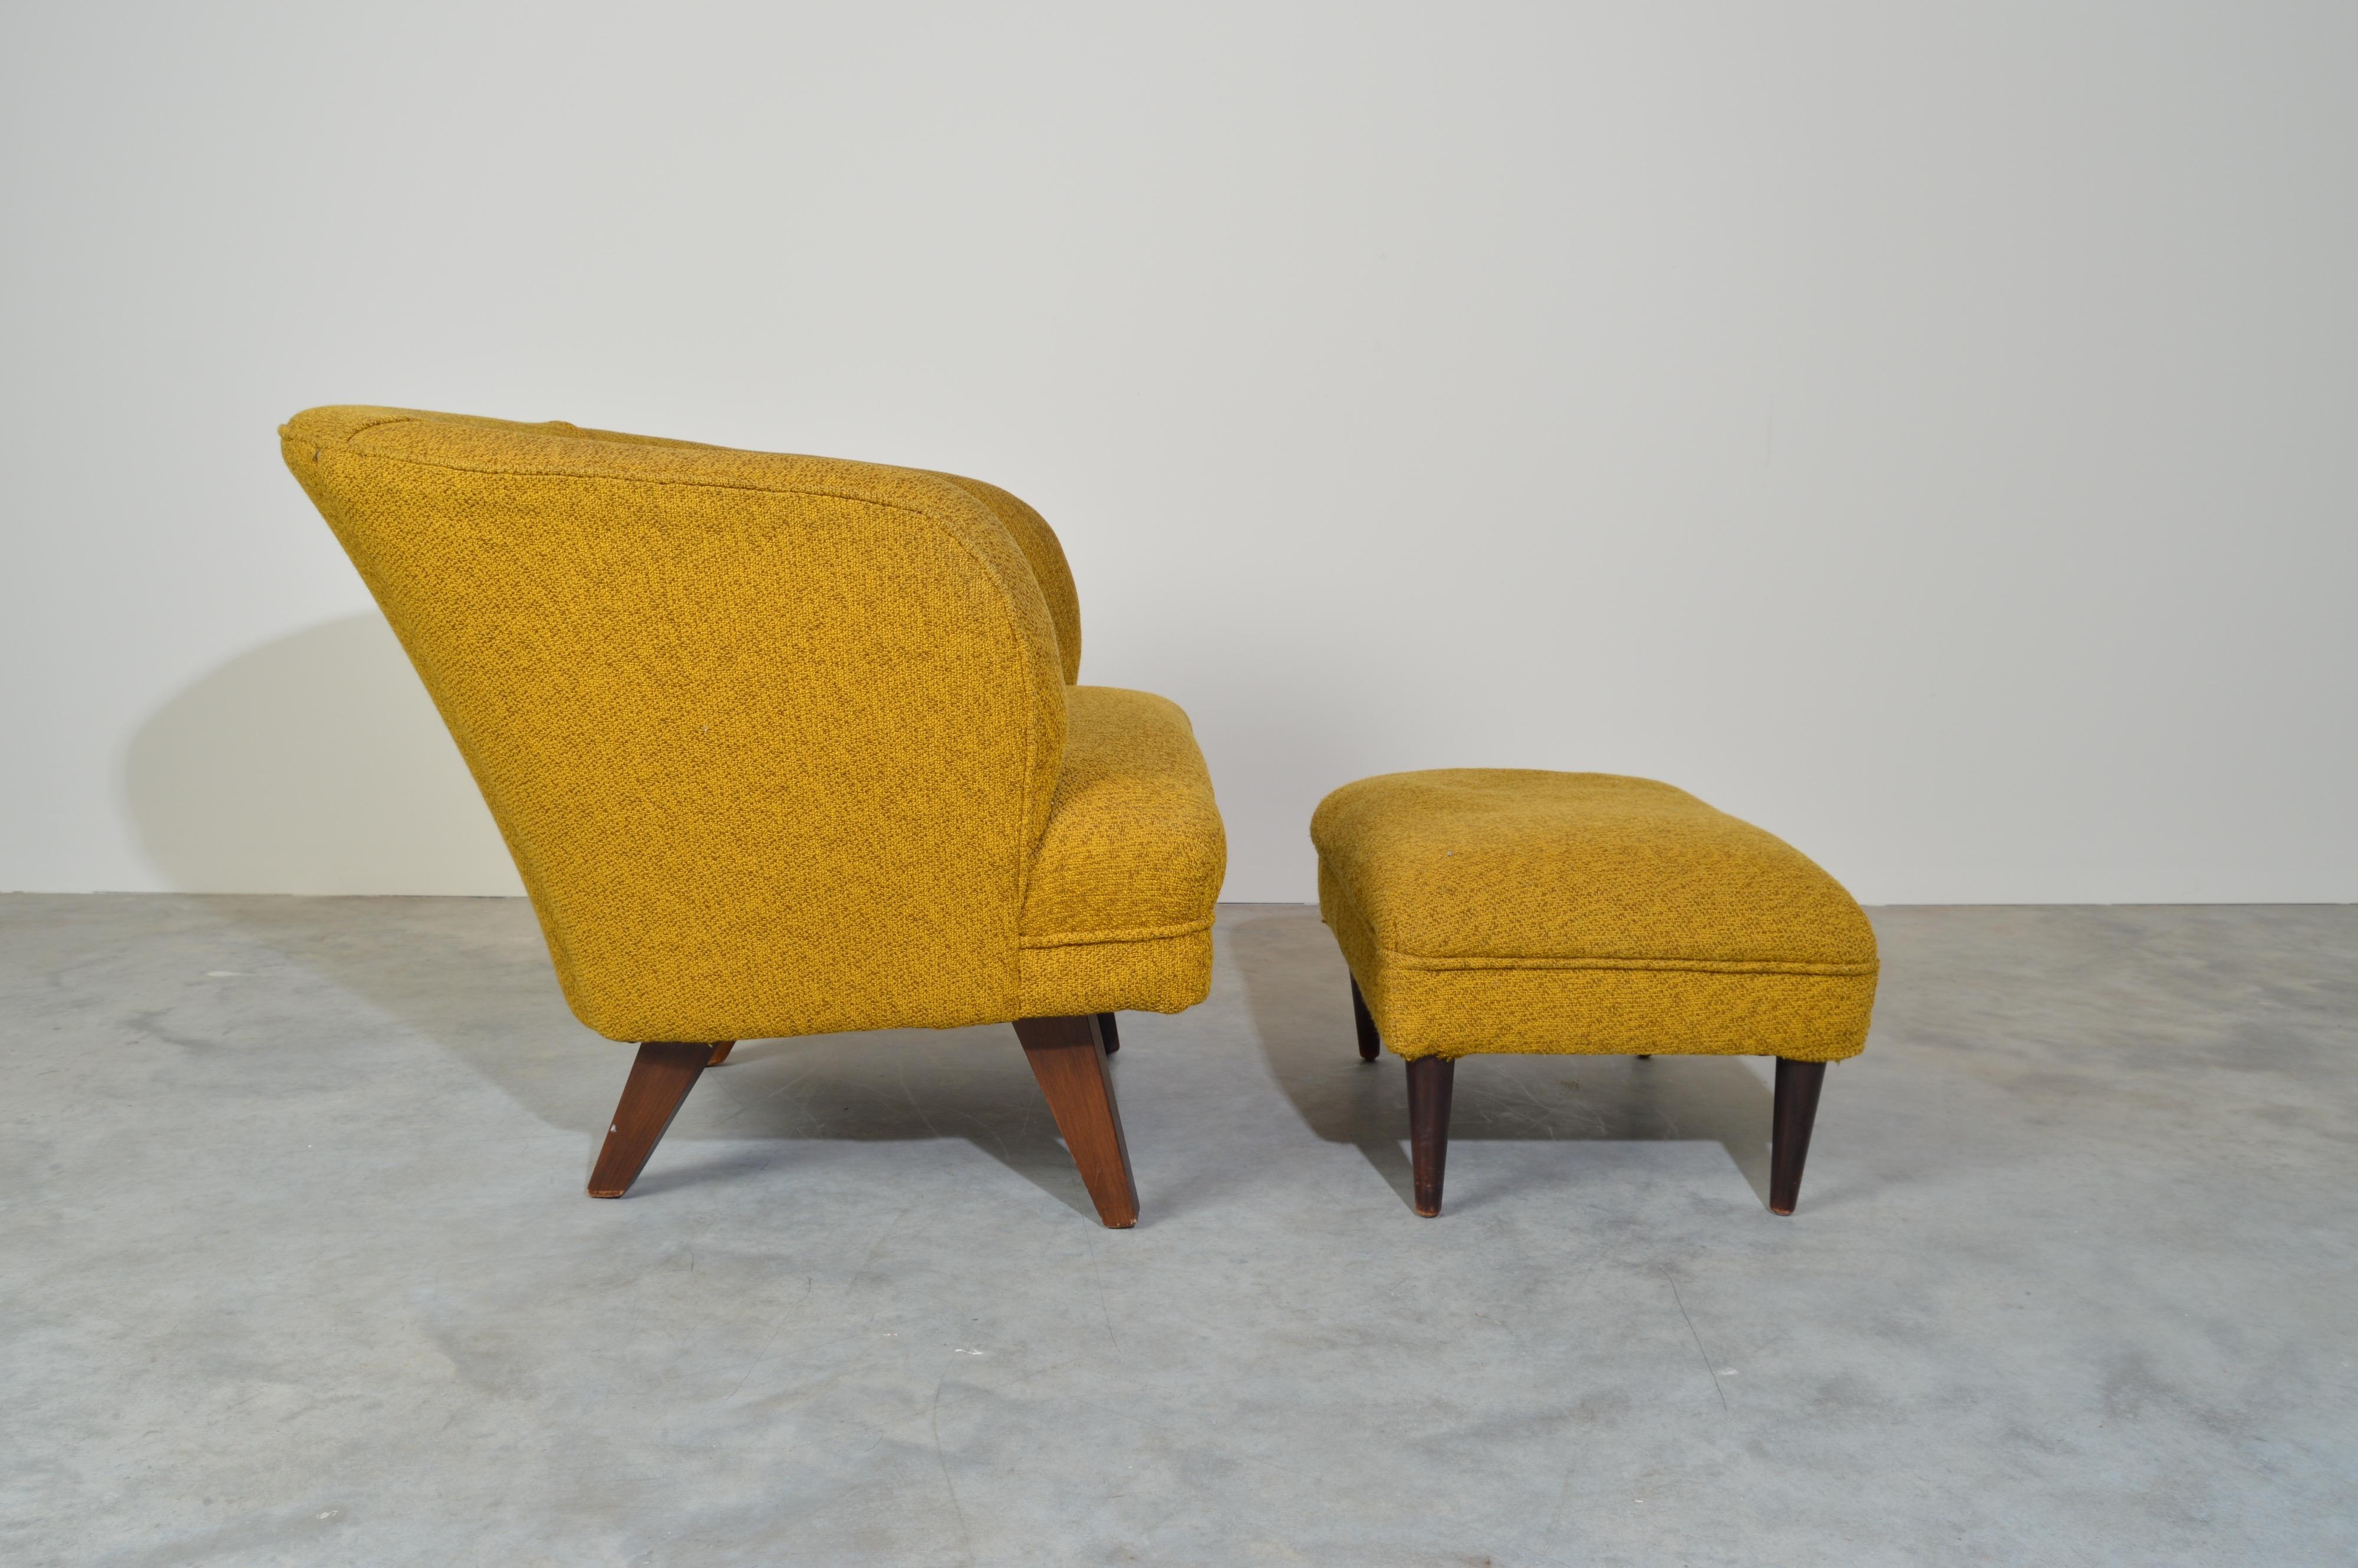 A 1950s lounge chair and ottoman having striking lines coupled with a comfortable design.
Original manufacturer is unknown. The quality is fantastic.
Dried foam inside the ottoman. The chair is great and ready for use!
Ottoman dimensions: 13 H x 24